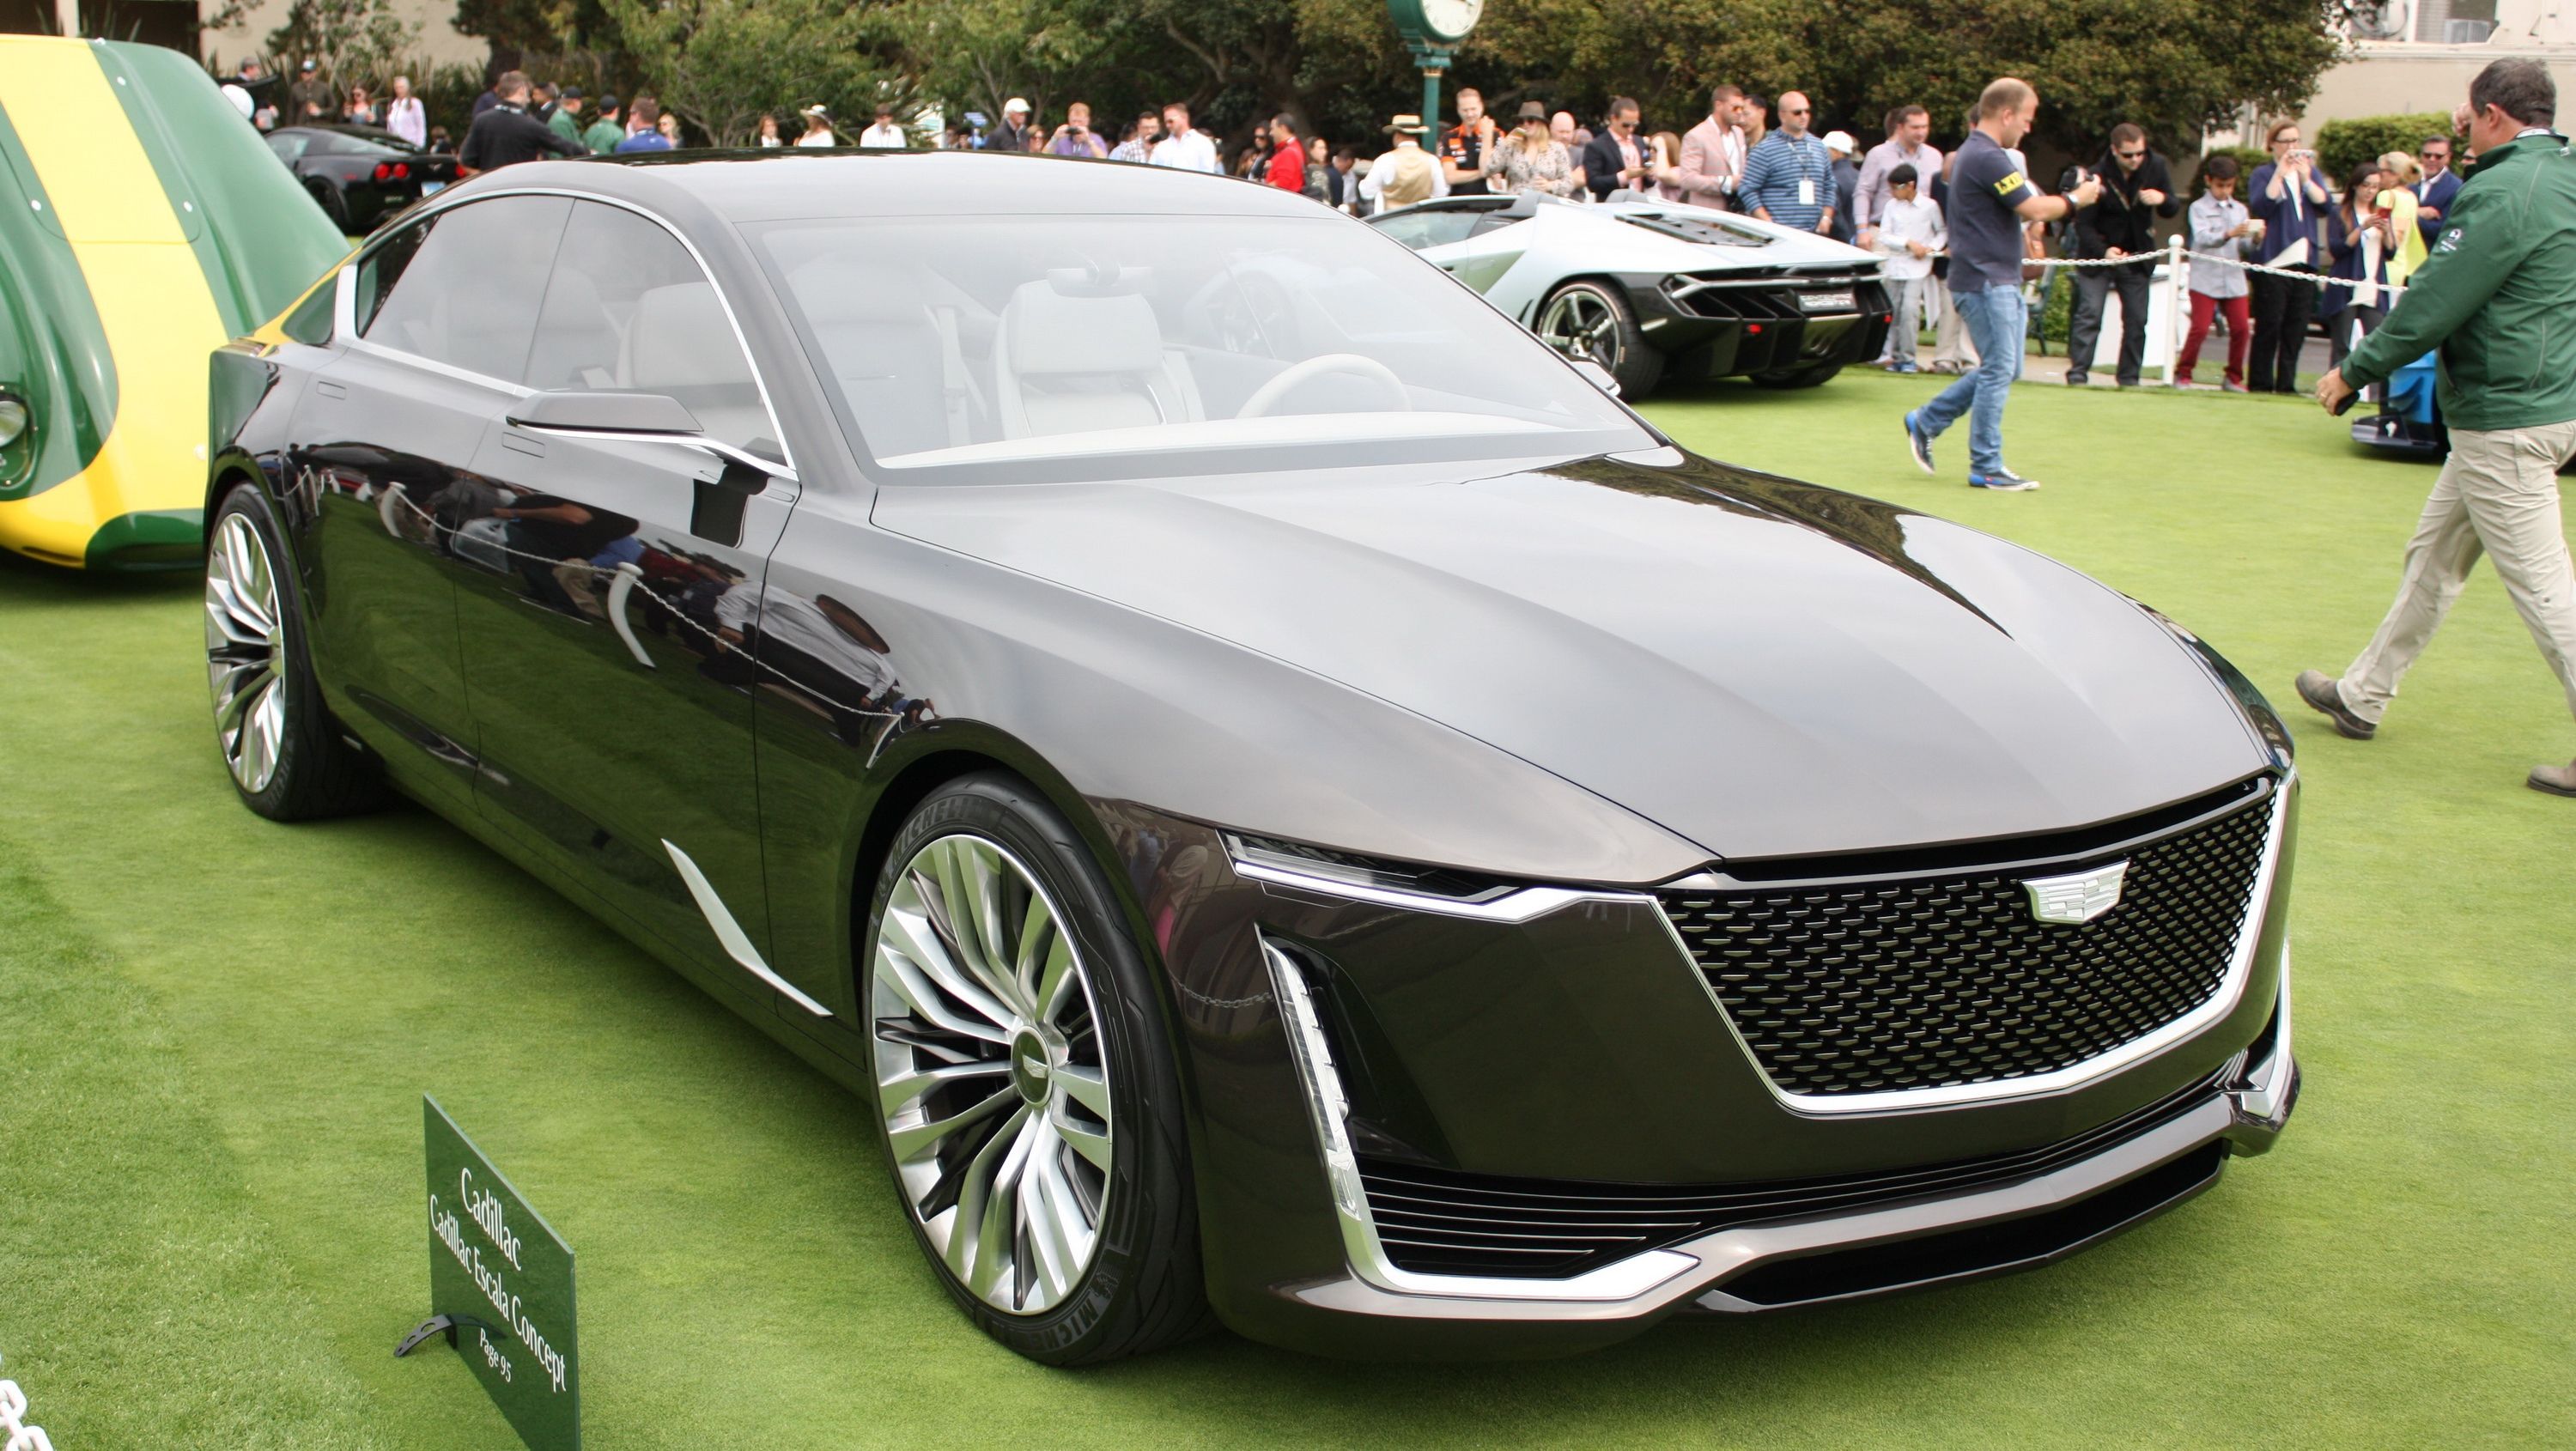 2015 - 2016 Cadillac Uncertain About Future Plans, Including The New Flagship Model